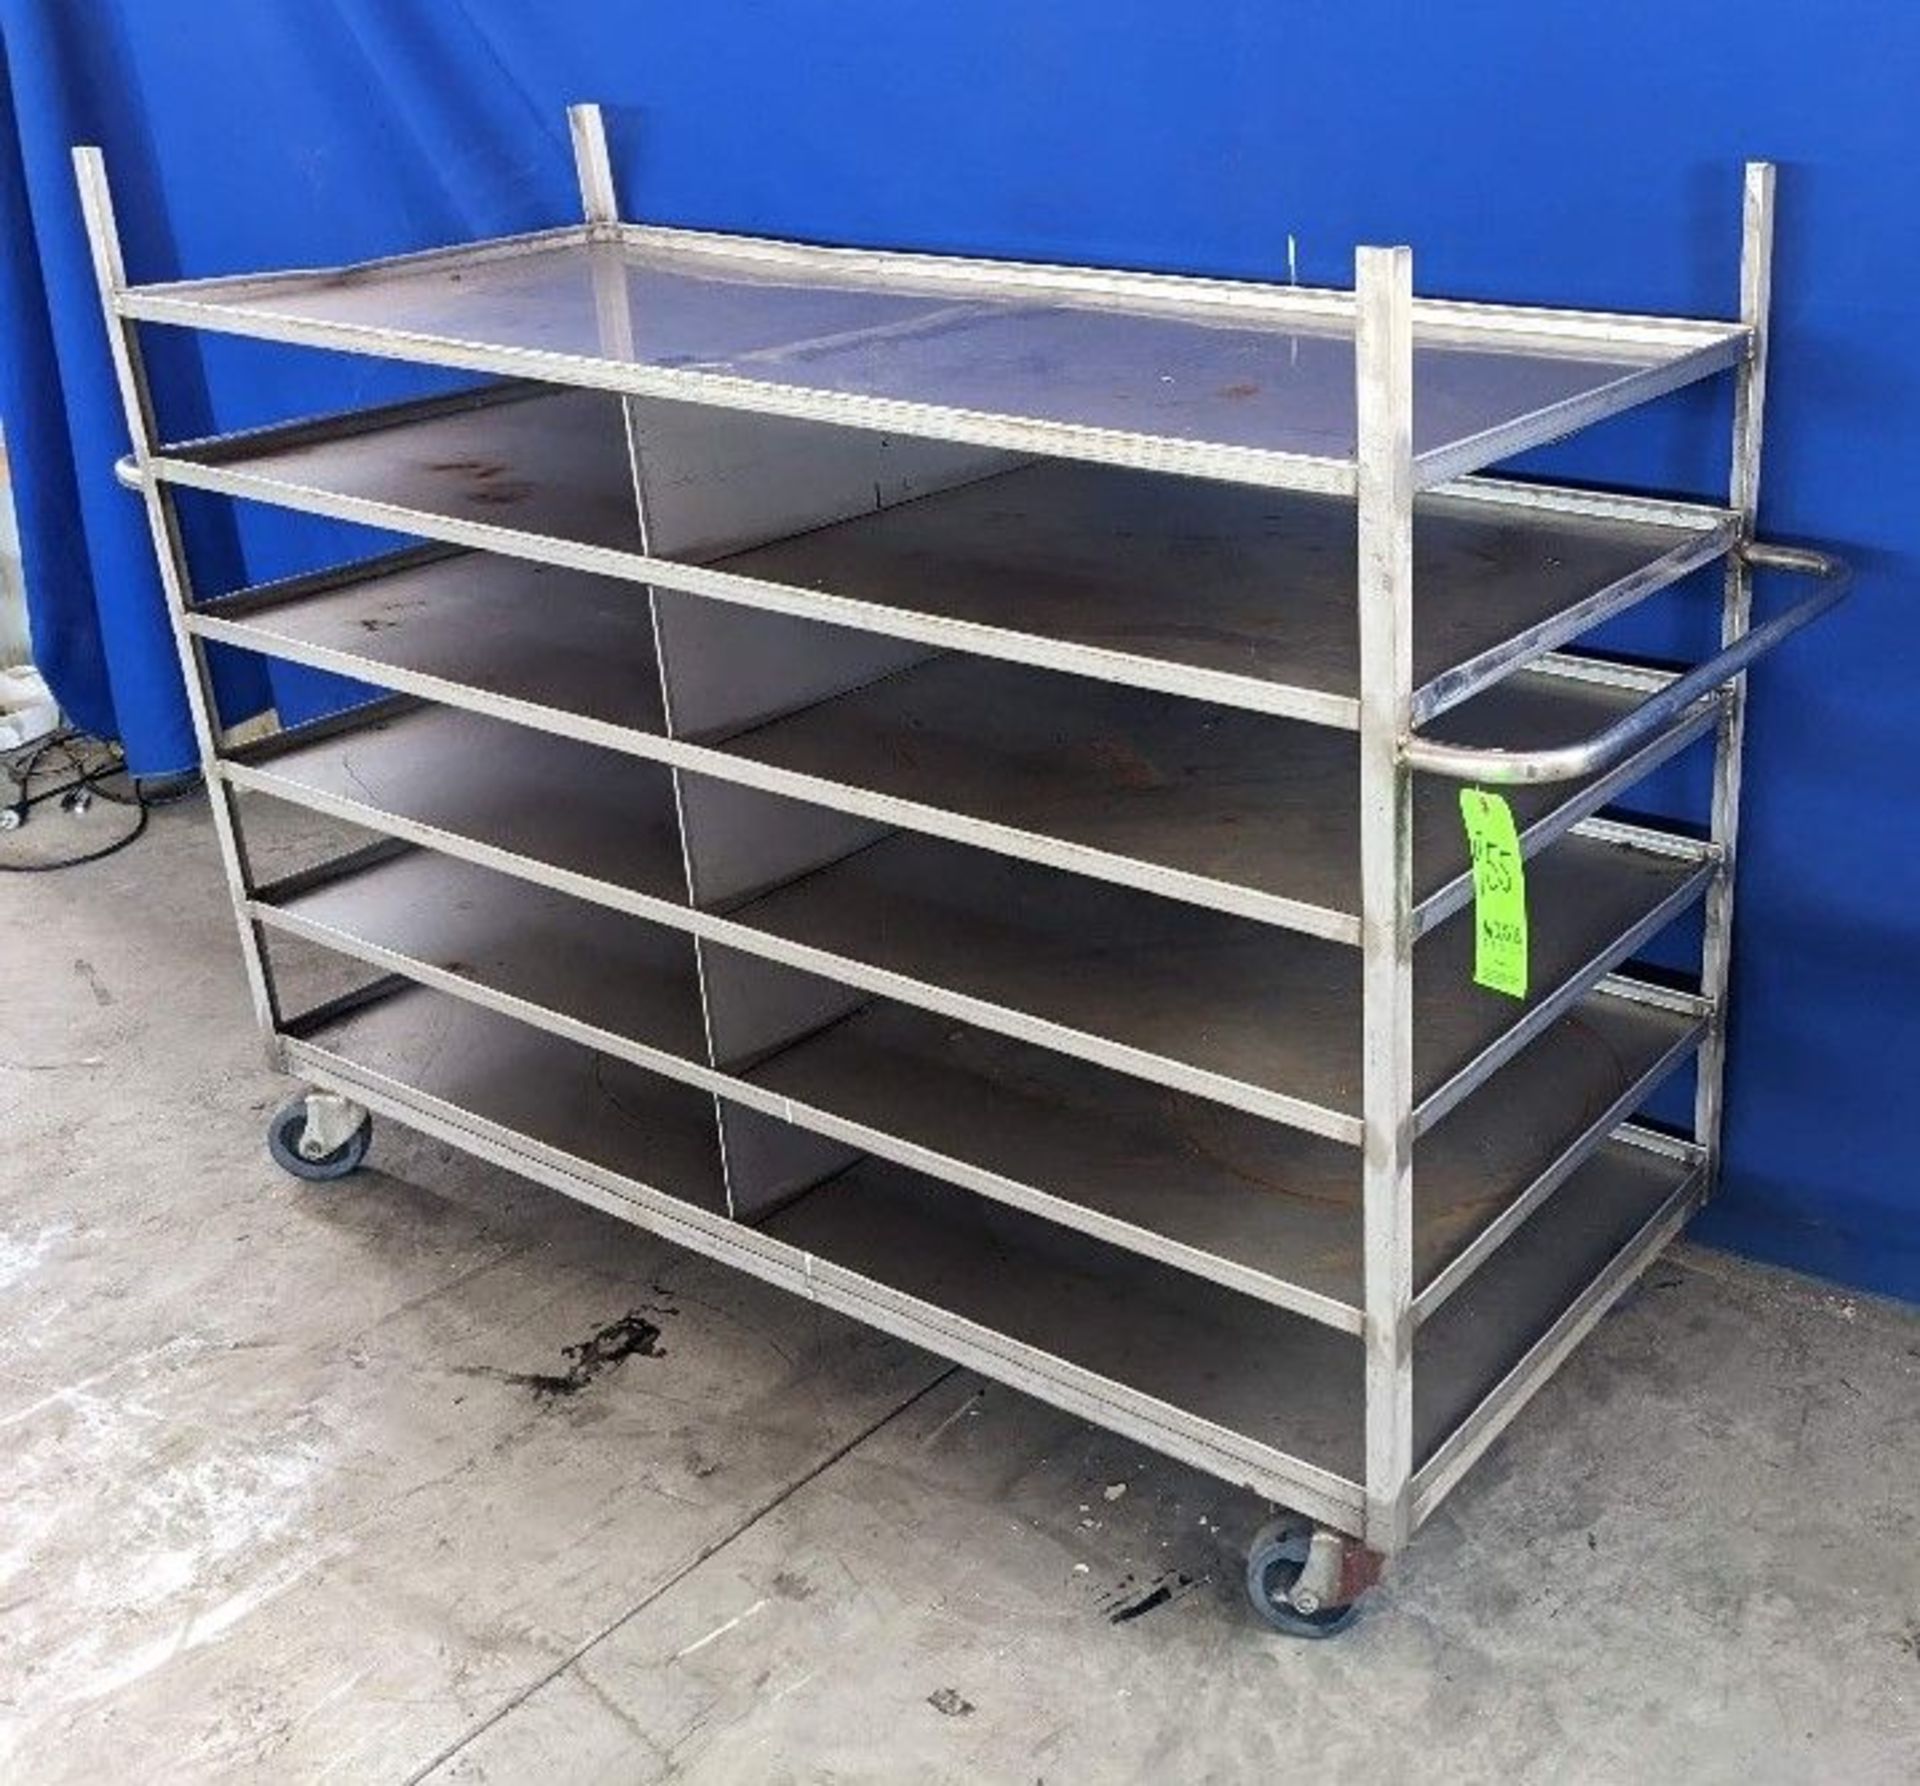 Qty (1) Material Handling Cart - Dimensions: 69"L x 28"W x 53"H (Handles Stick Out 6" on Each Side), - Image 3 of 3